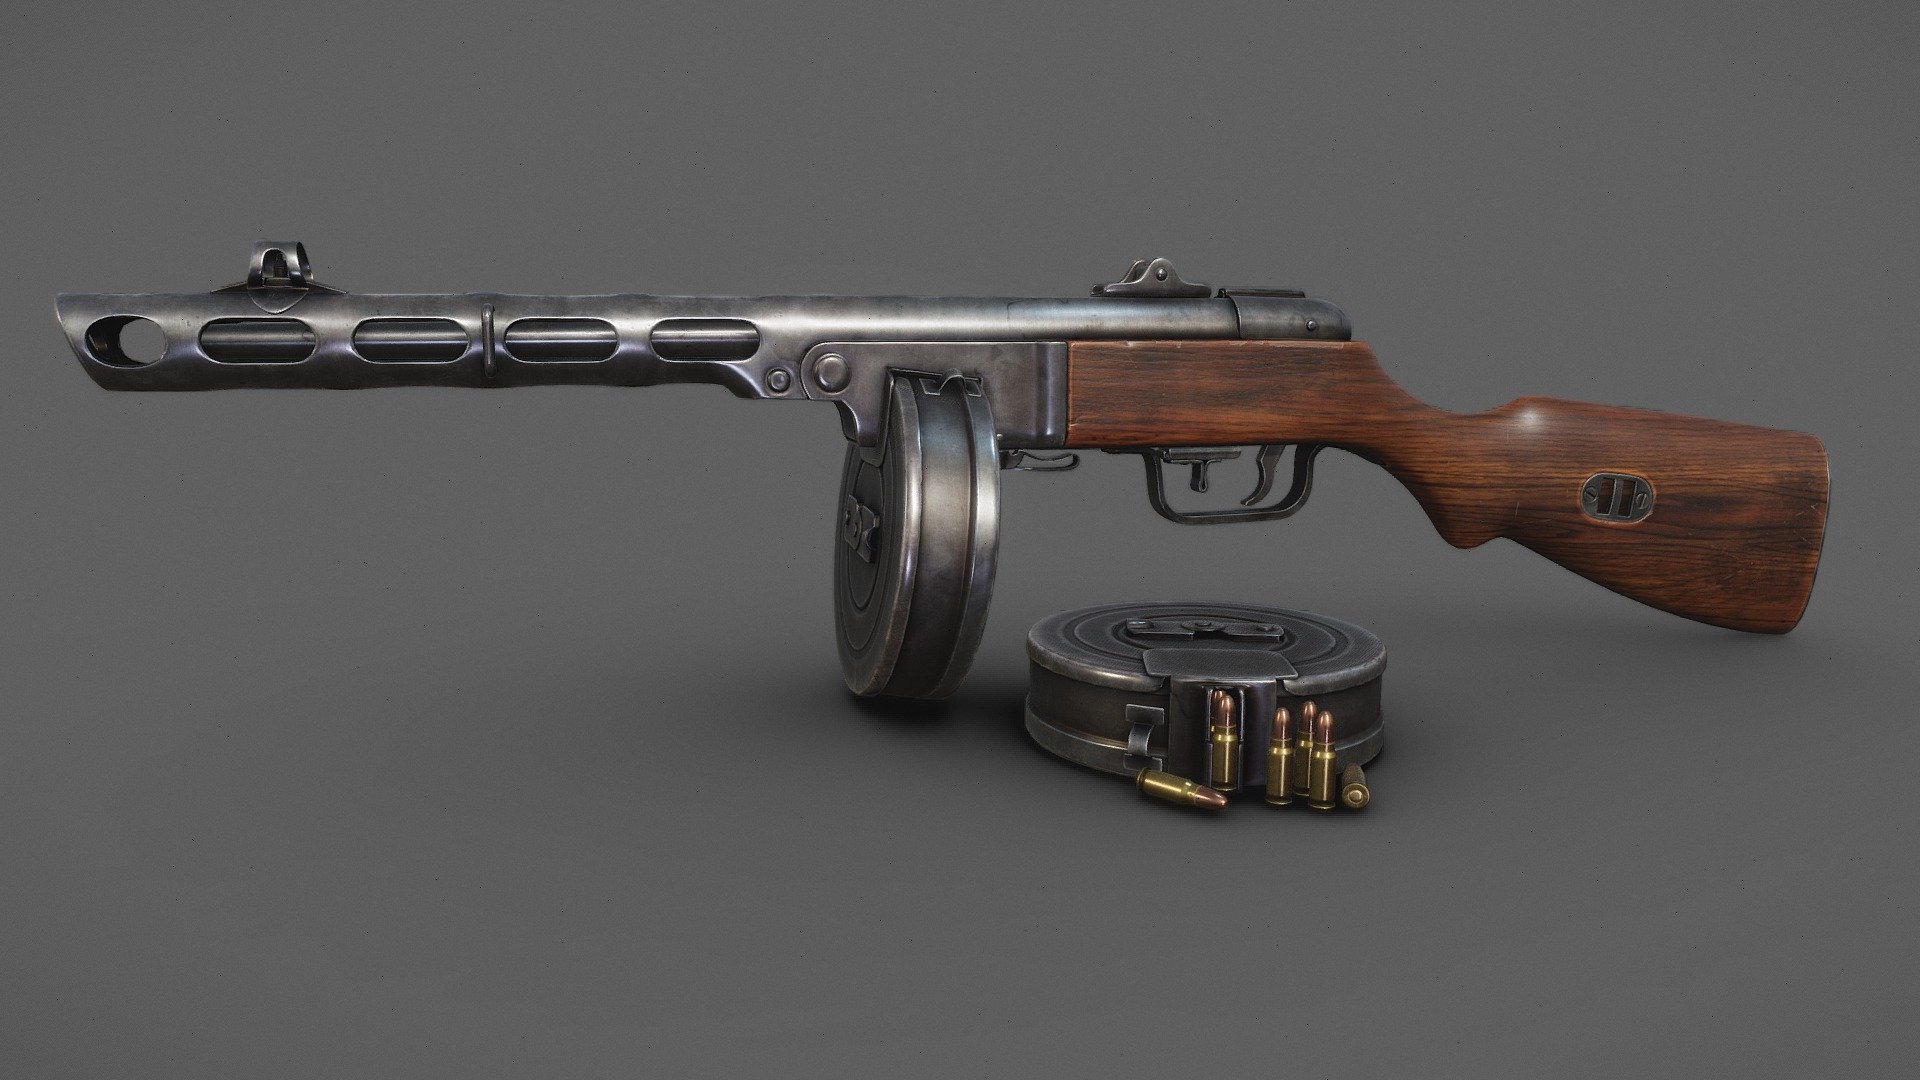 PPSh low poly model

4k textures. Total polycount 17089 tris.

Model created on Blender and ZBrush. Textured with Substance Painter 3d model